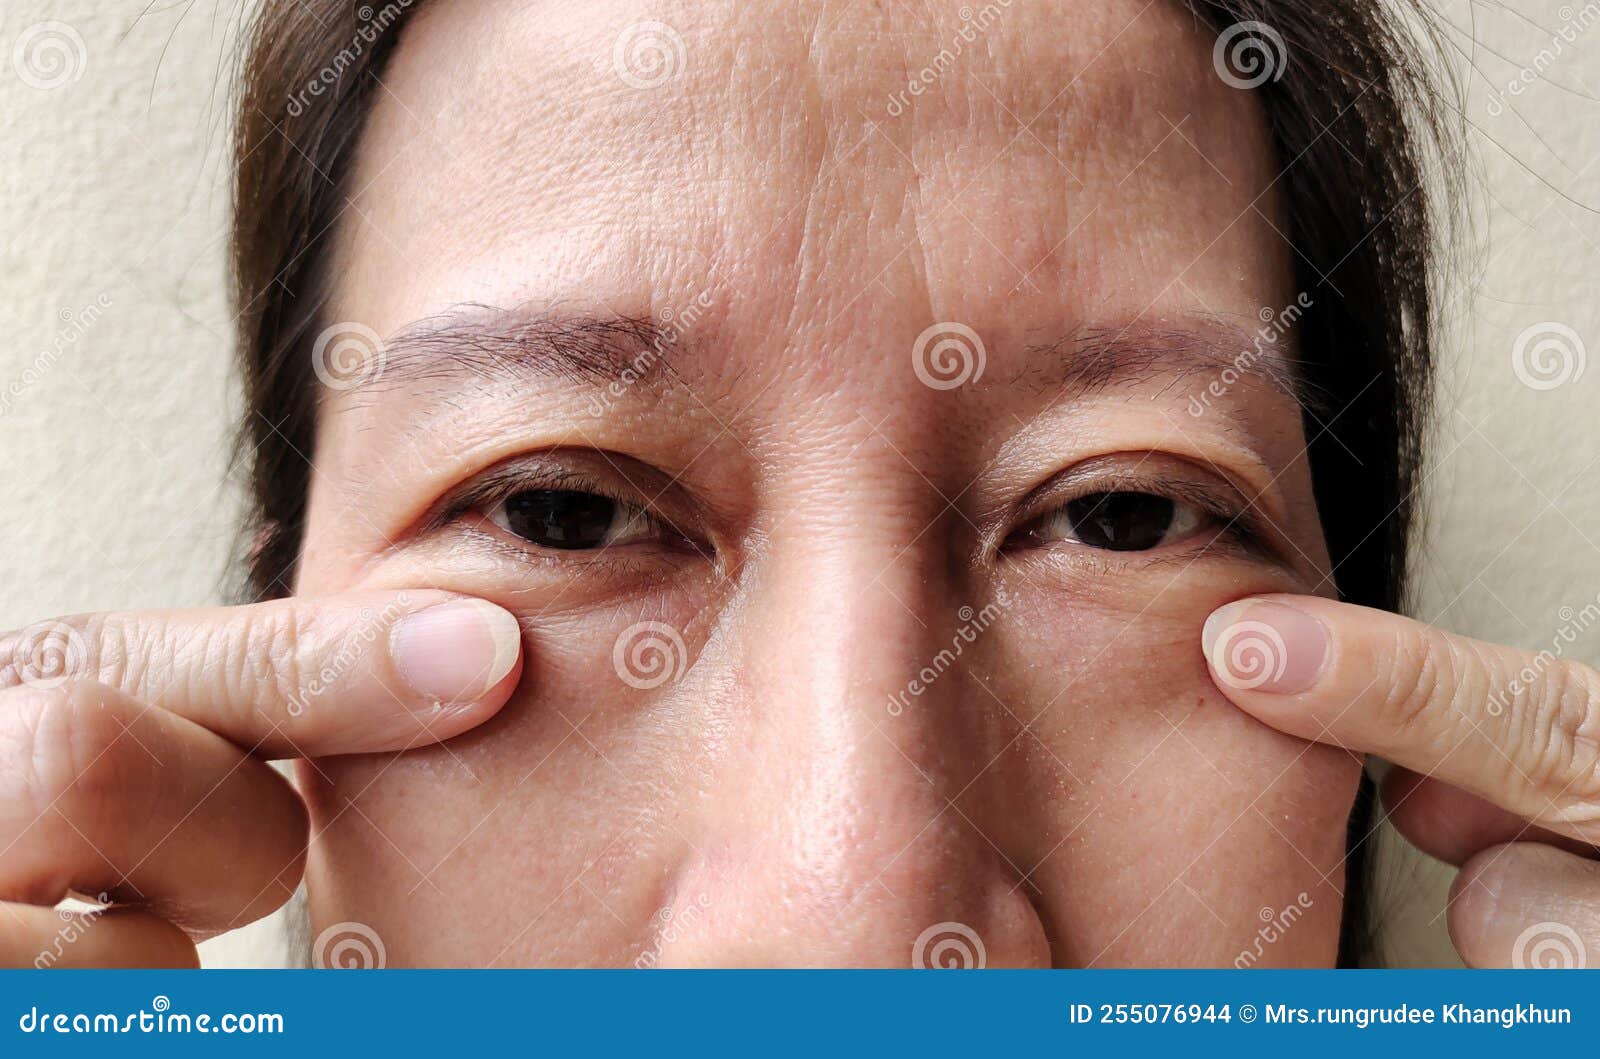 Premium Photo | Asian elderly old woman face and eye with wrinkles portrait closeup view